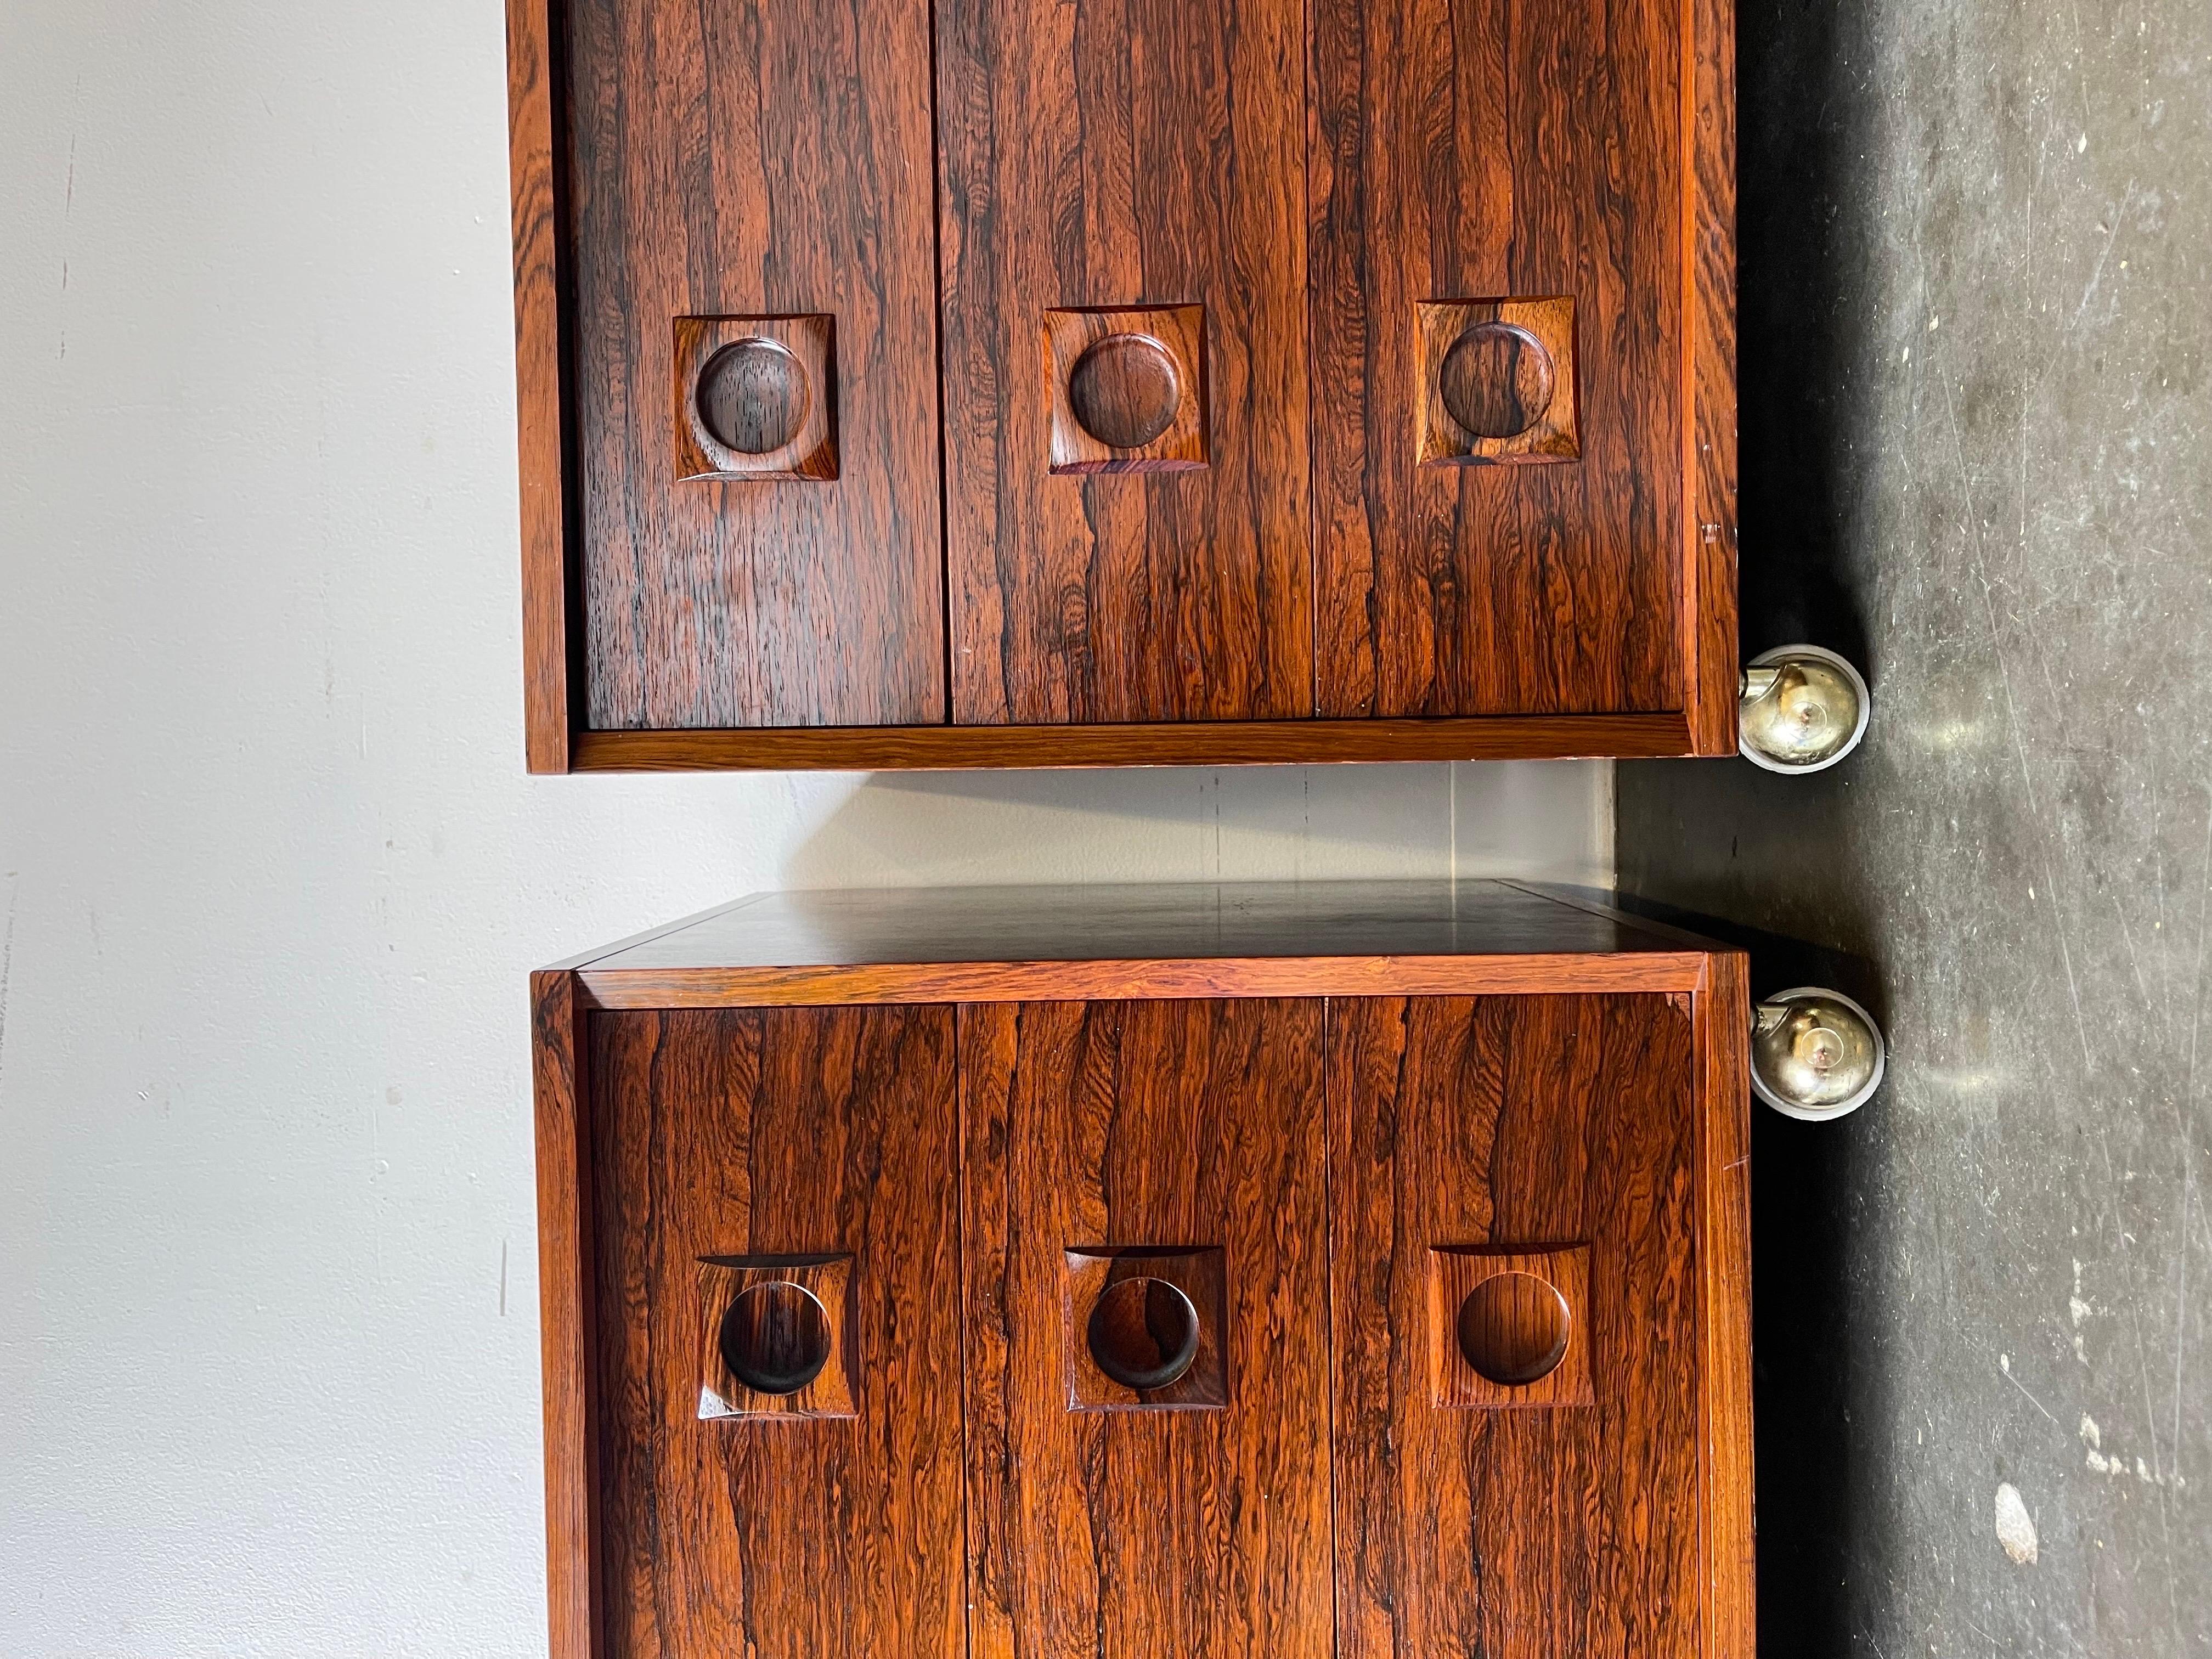 Danish rosewood three drawer low dressers on rolling casters.

Gorgeous pair of vintage low three drawer chests of rolling casters.

Excellent condition with minimal wear.

The grain is outstanding on the pair.

Prefer to sell together but